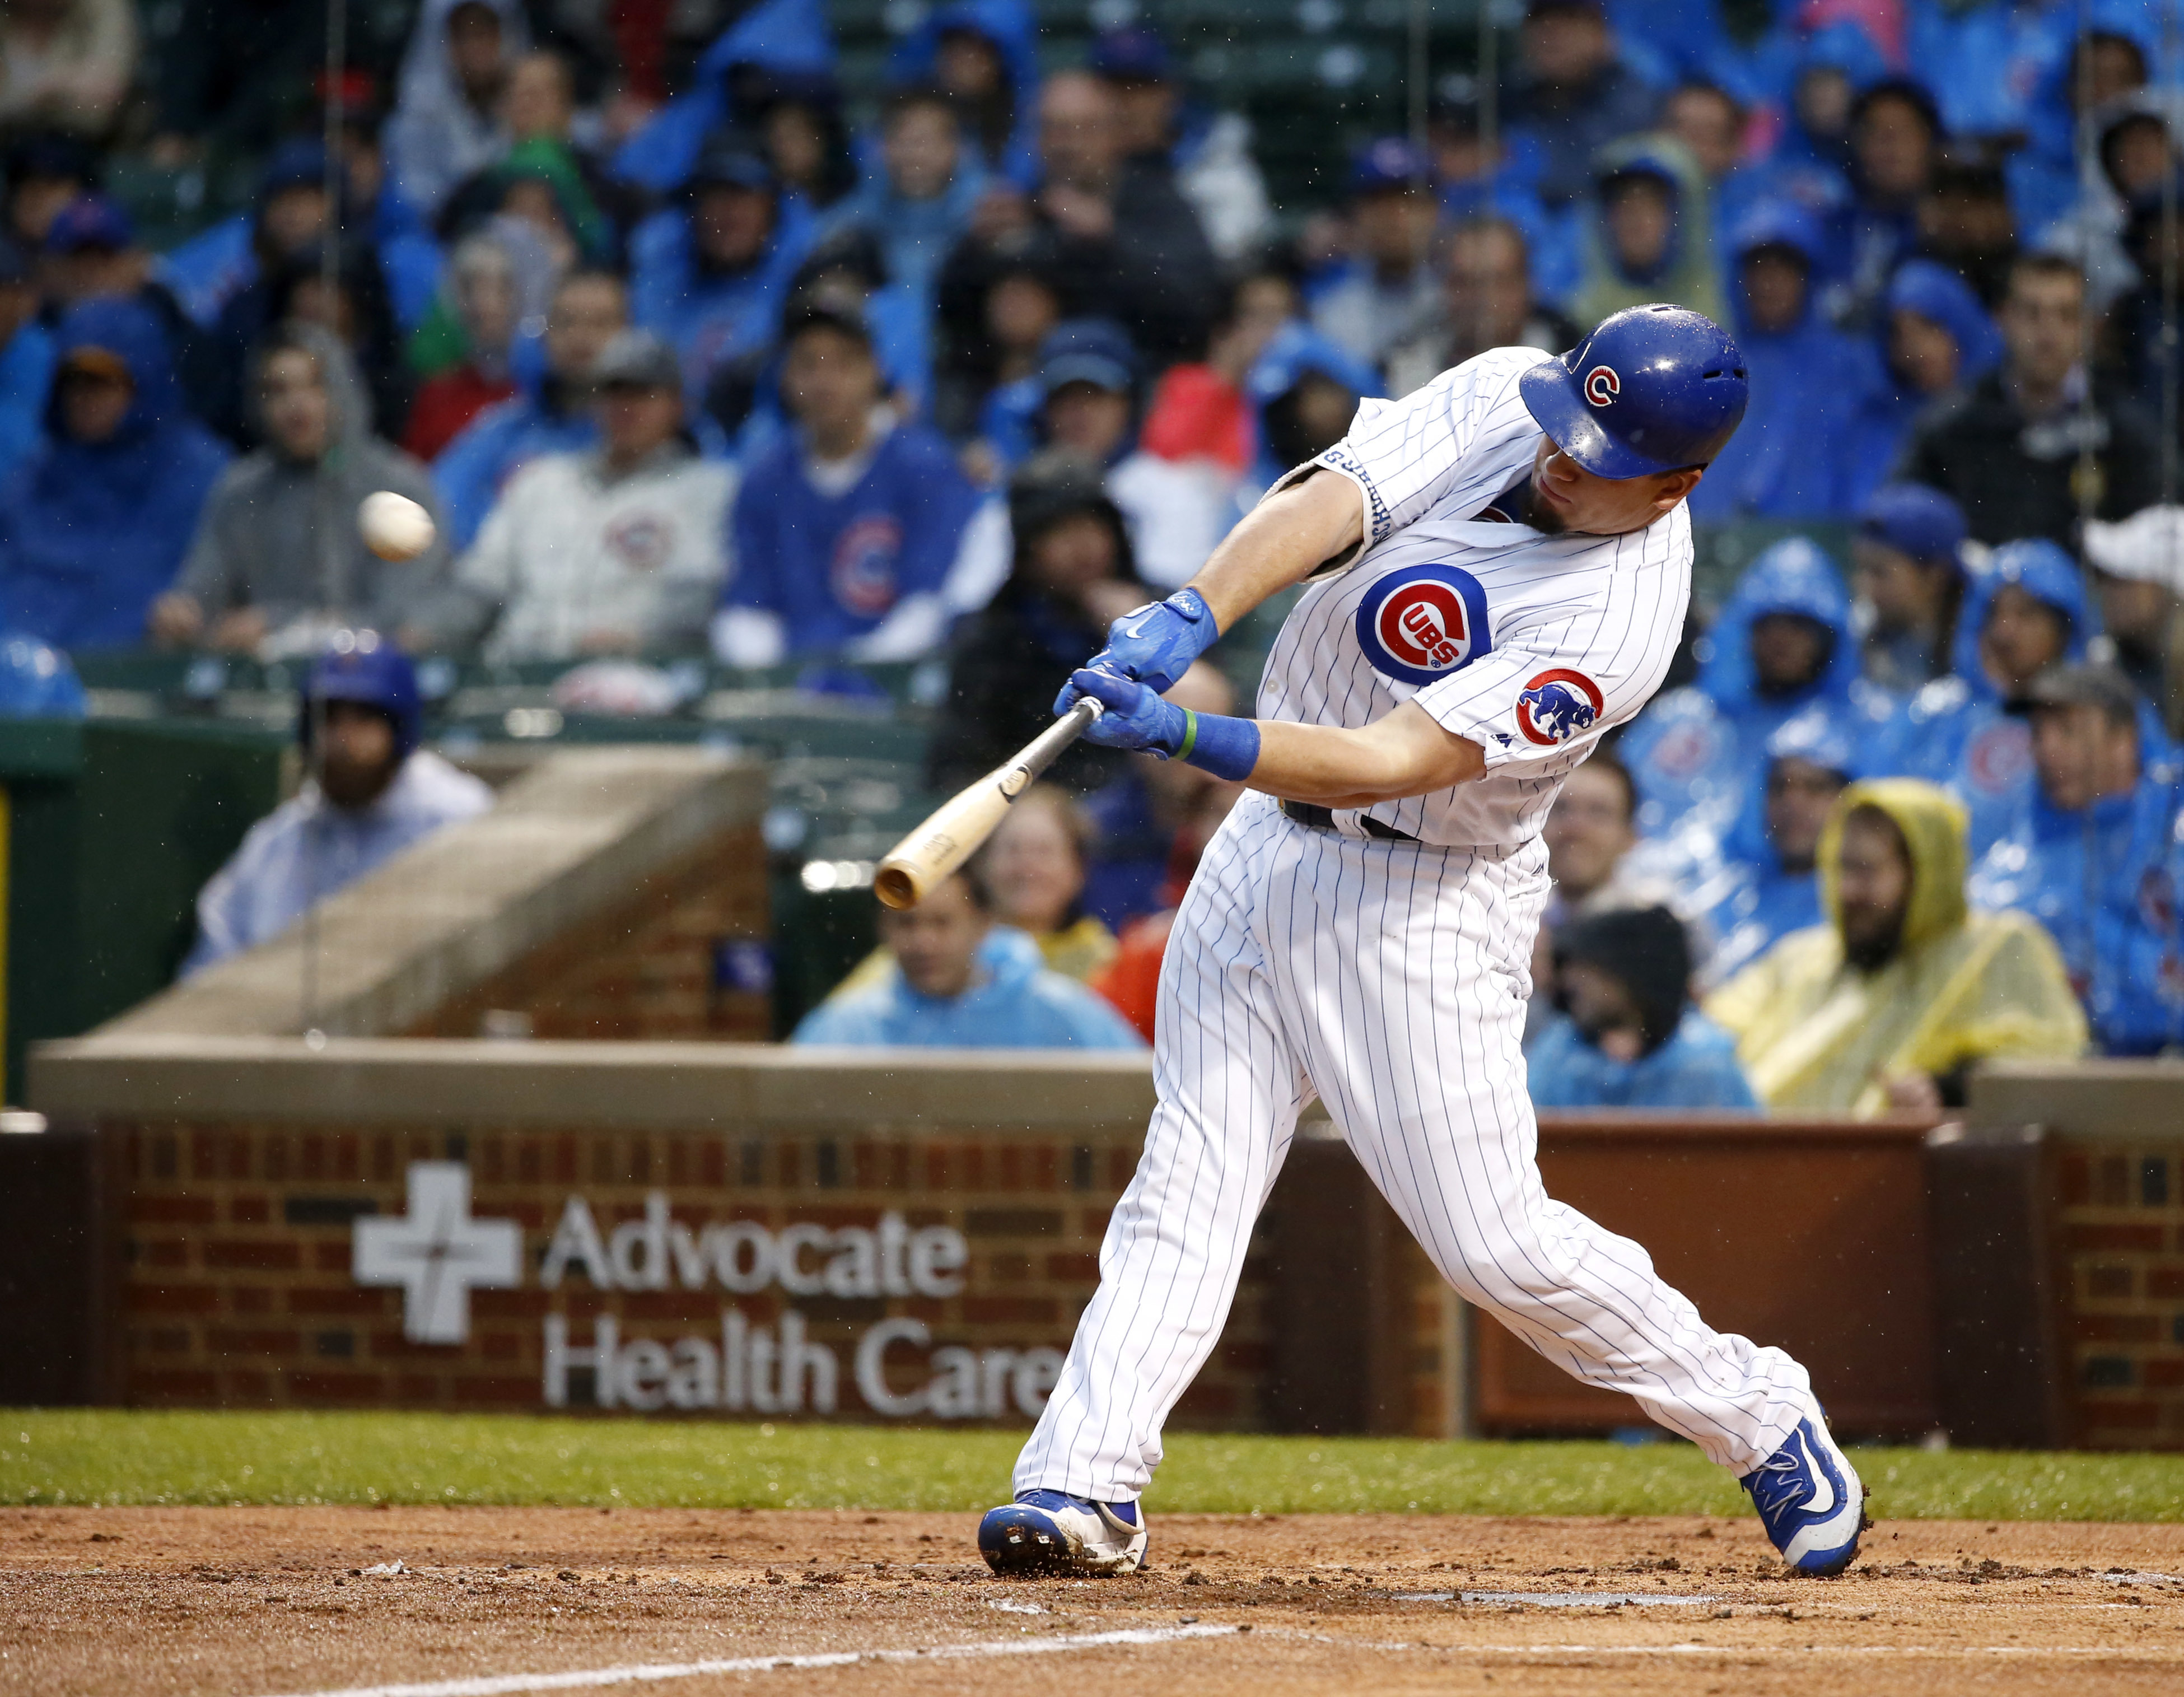 Career-high 47th home run for Kyle Schwarber hits the second deck